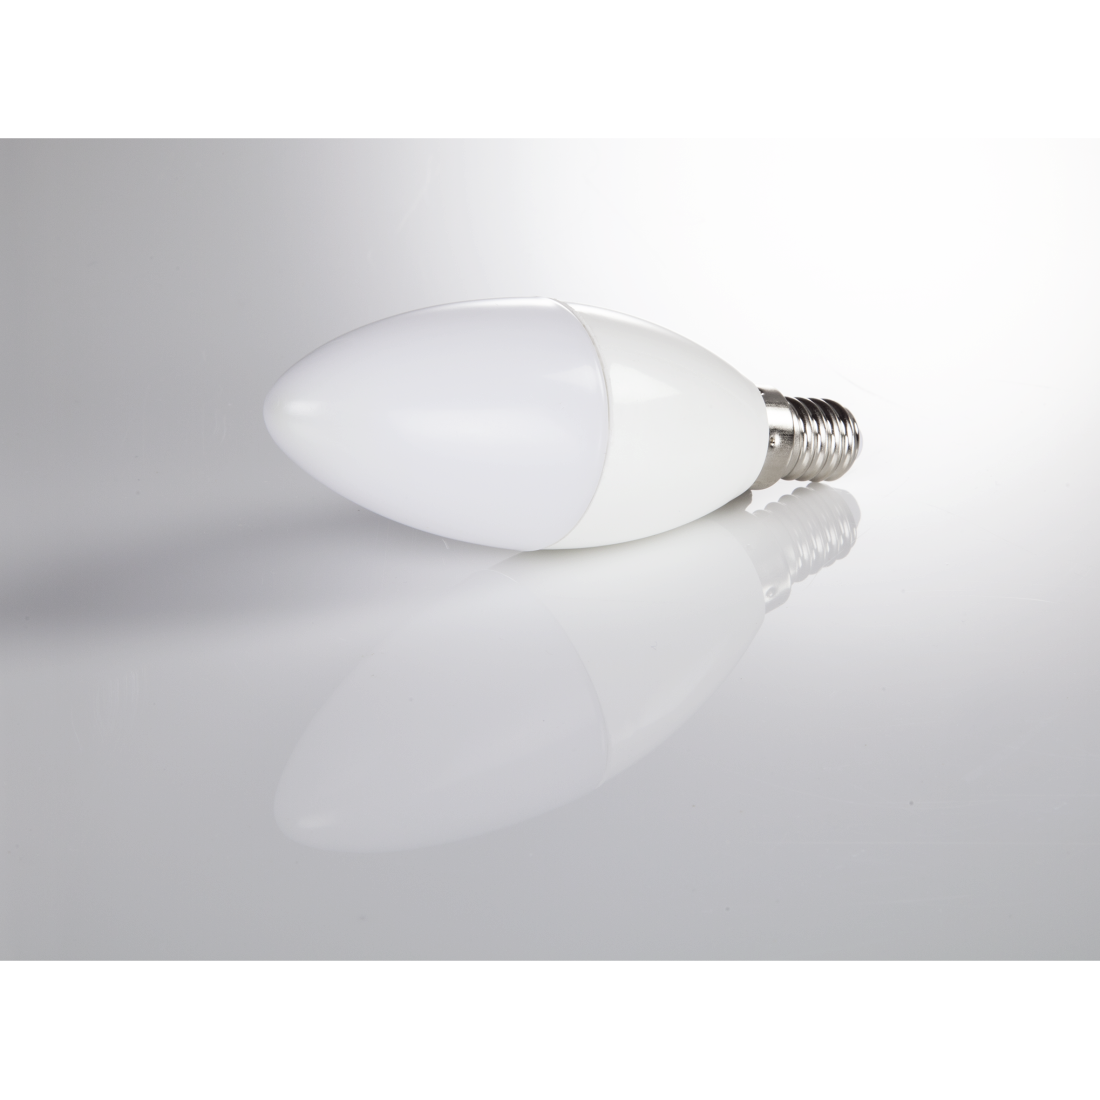 abx3 High-Res Image 3 - Xavax, LED Bulb, E14, 470 lm Replaces 40W, Candle Bulb, neutral white